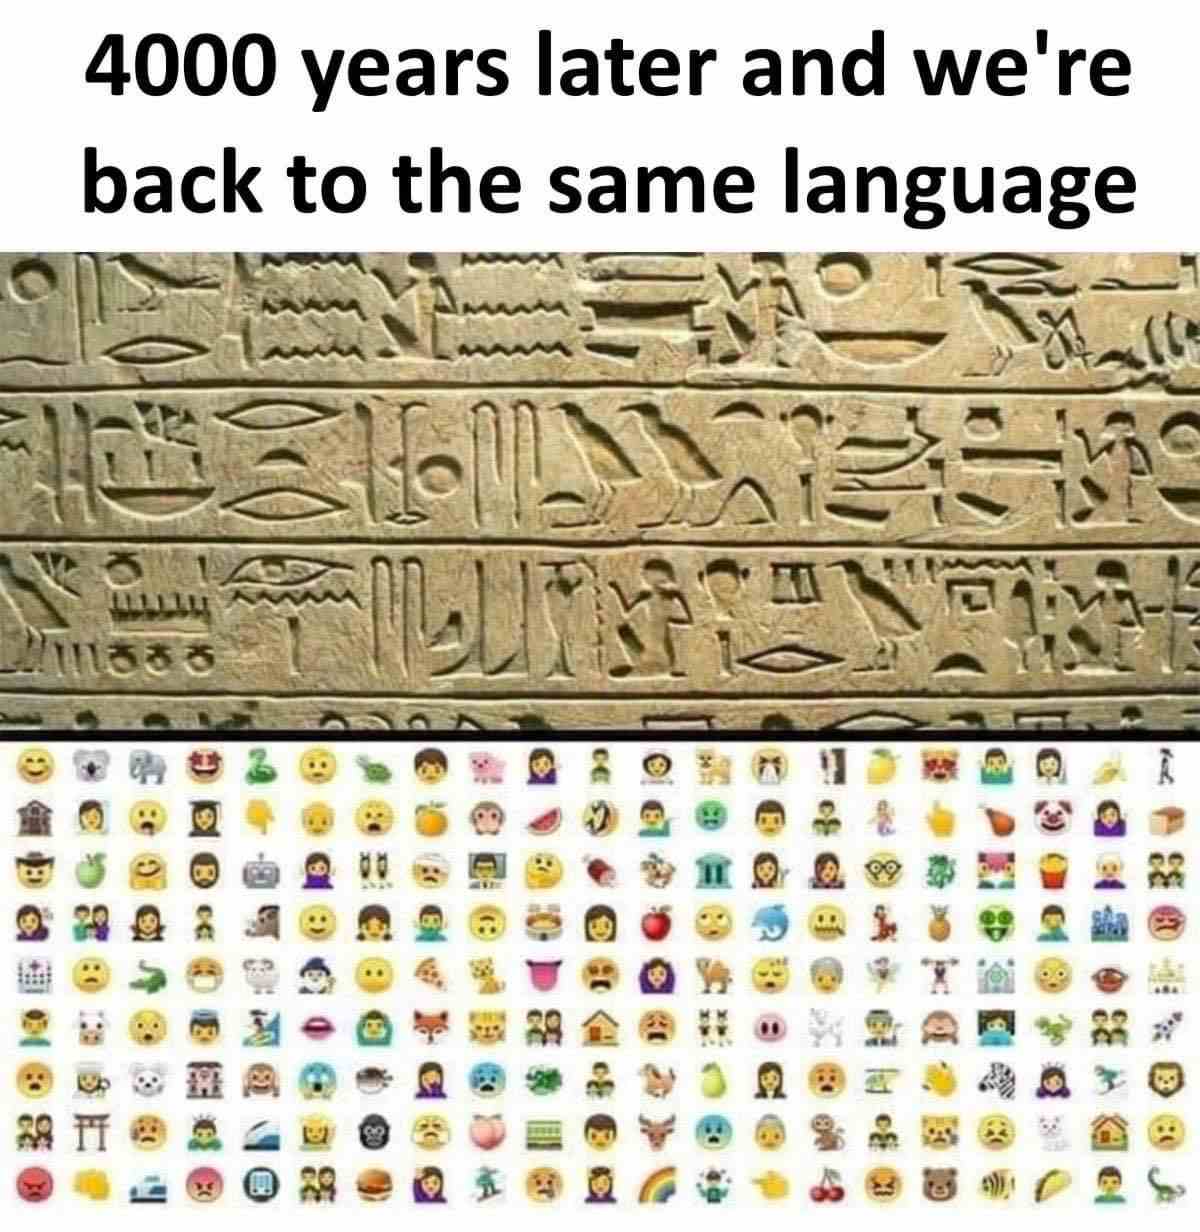 4000 years later and we're back to the same language